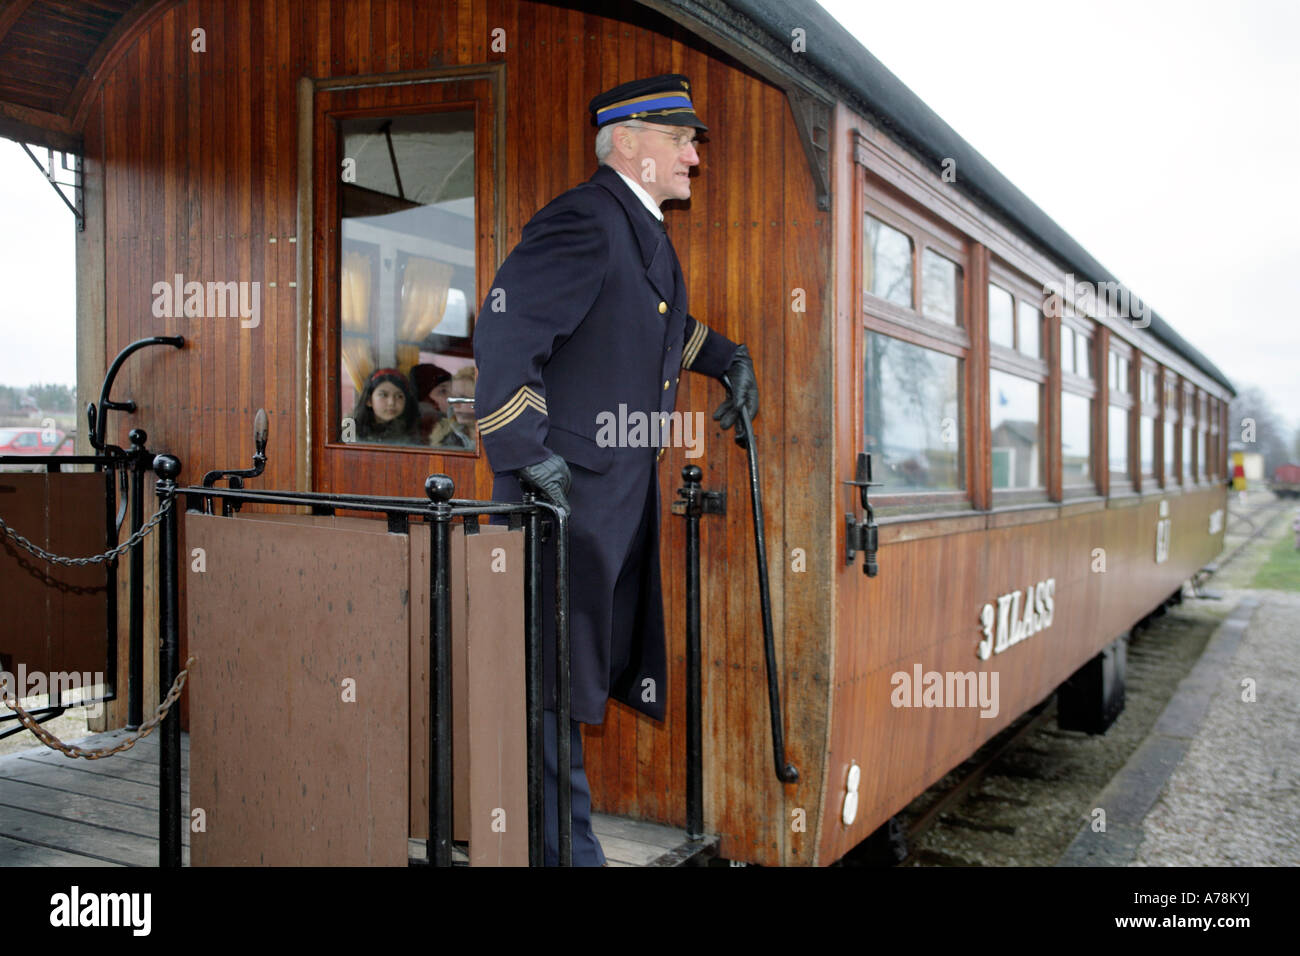 Vintage Train With Carriage From 1935 And Railway Official On Viewing Platform Of Coach At Dalhem Railway Station And Museum Stock Photo Alamy